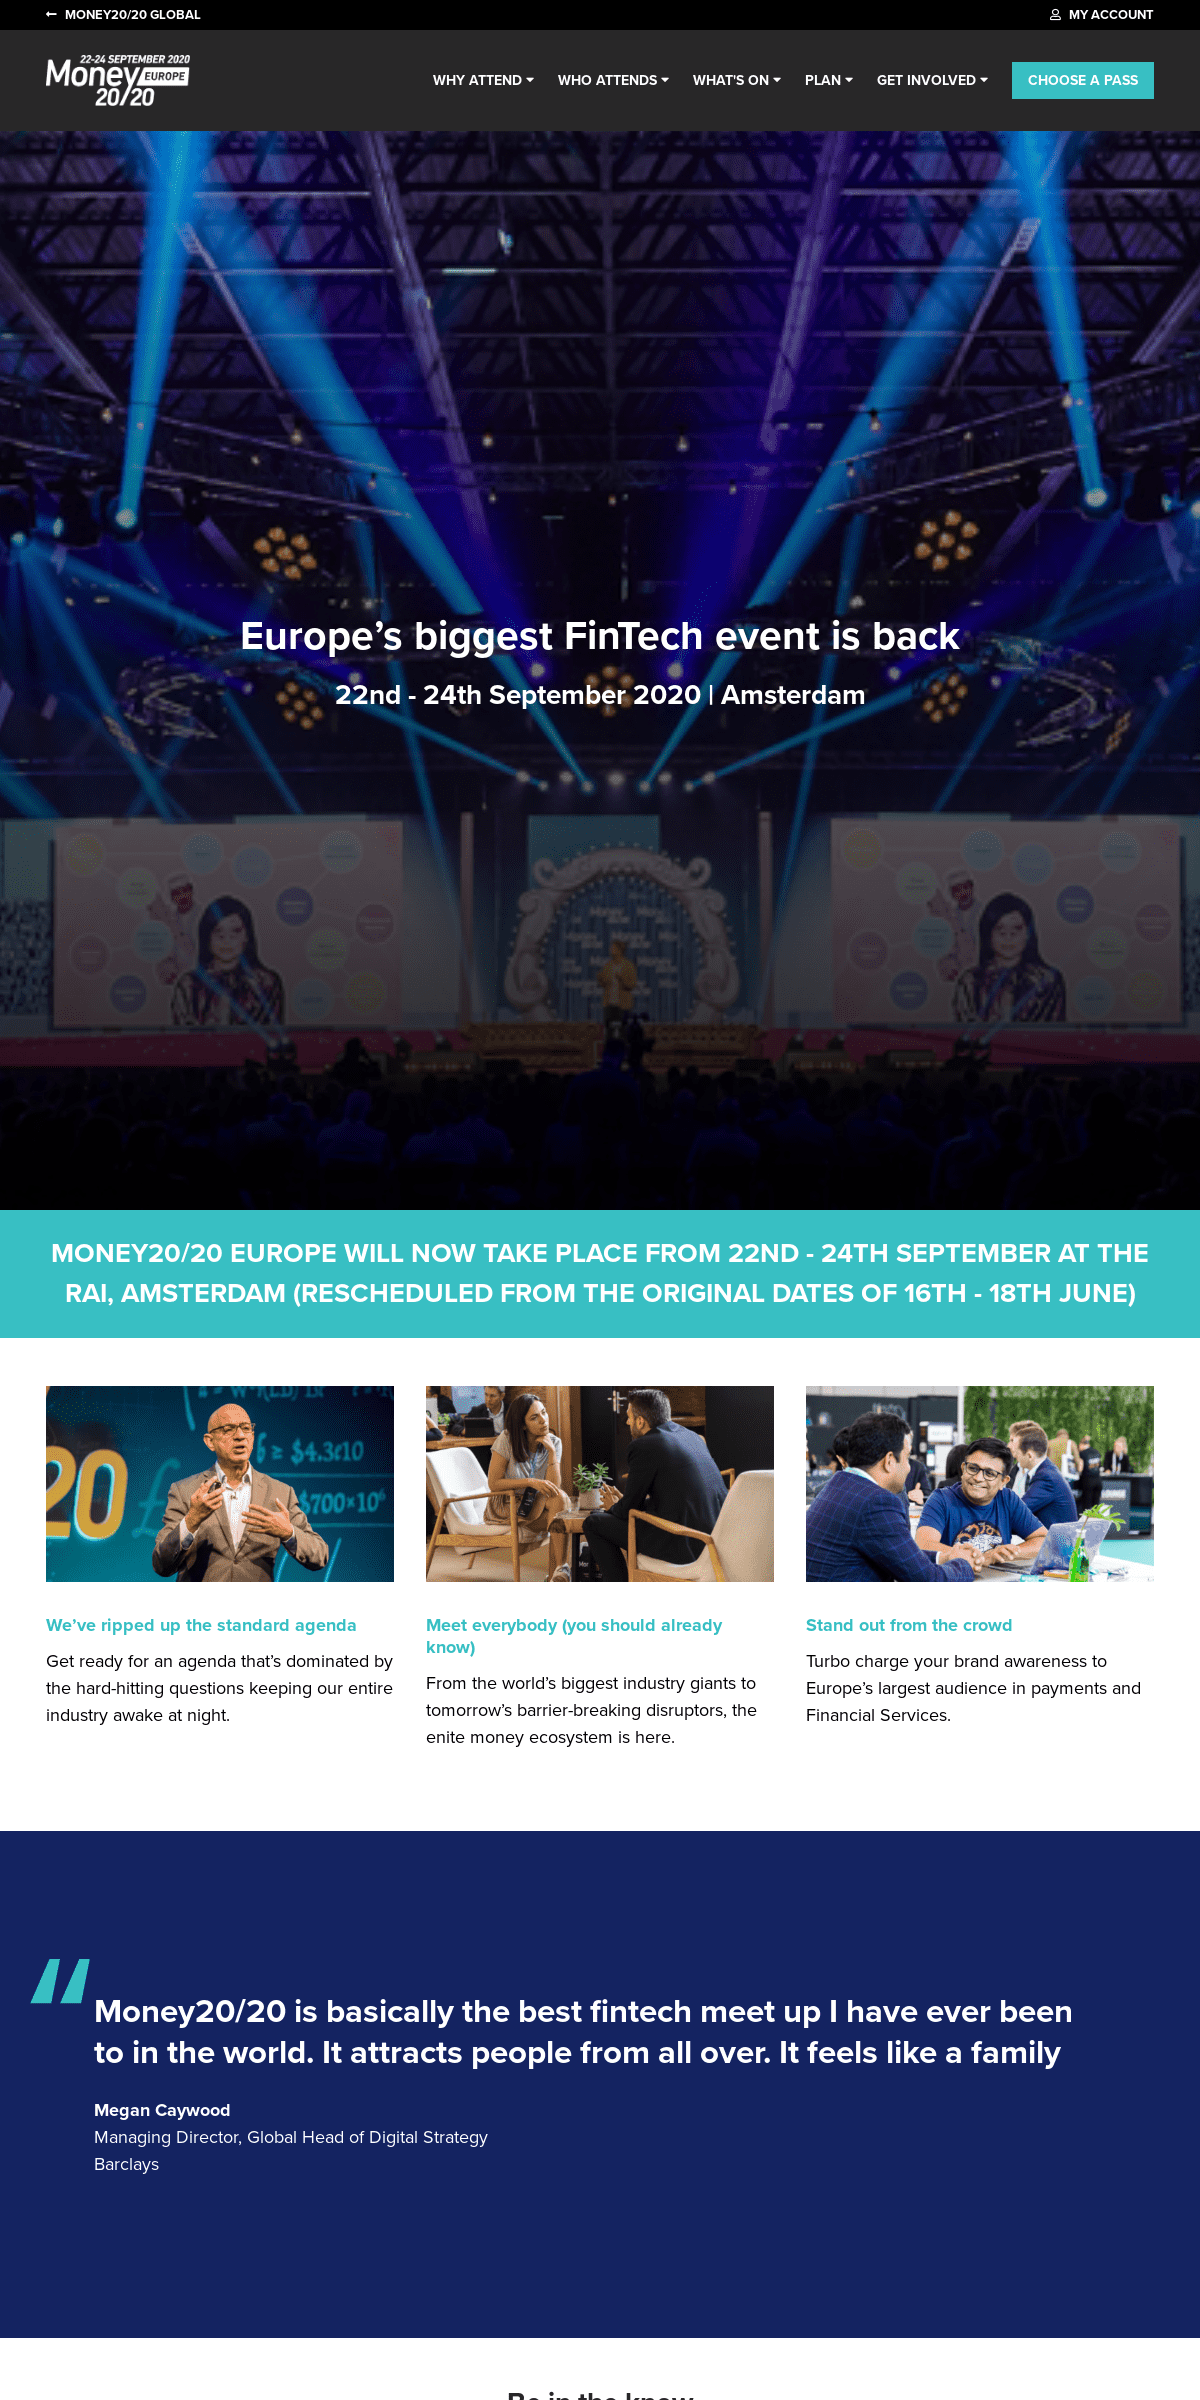 A complete backup of money2020europe.com